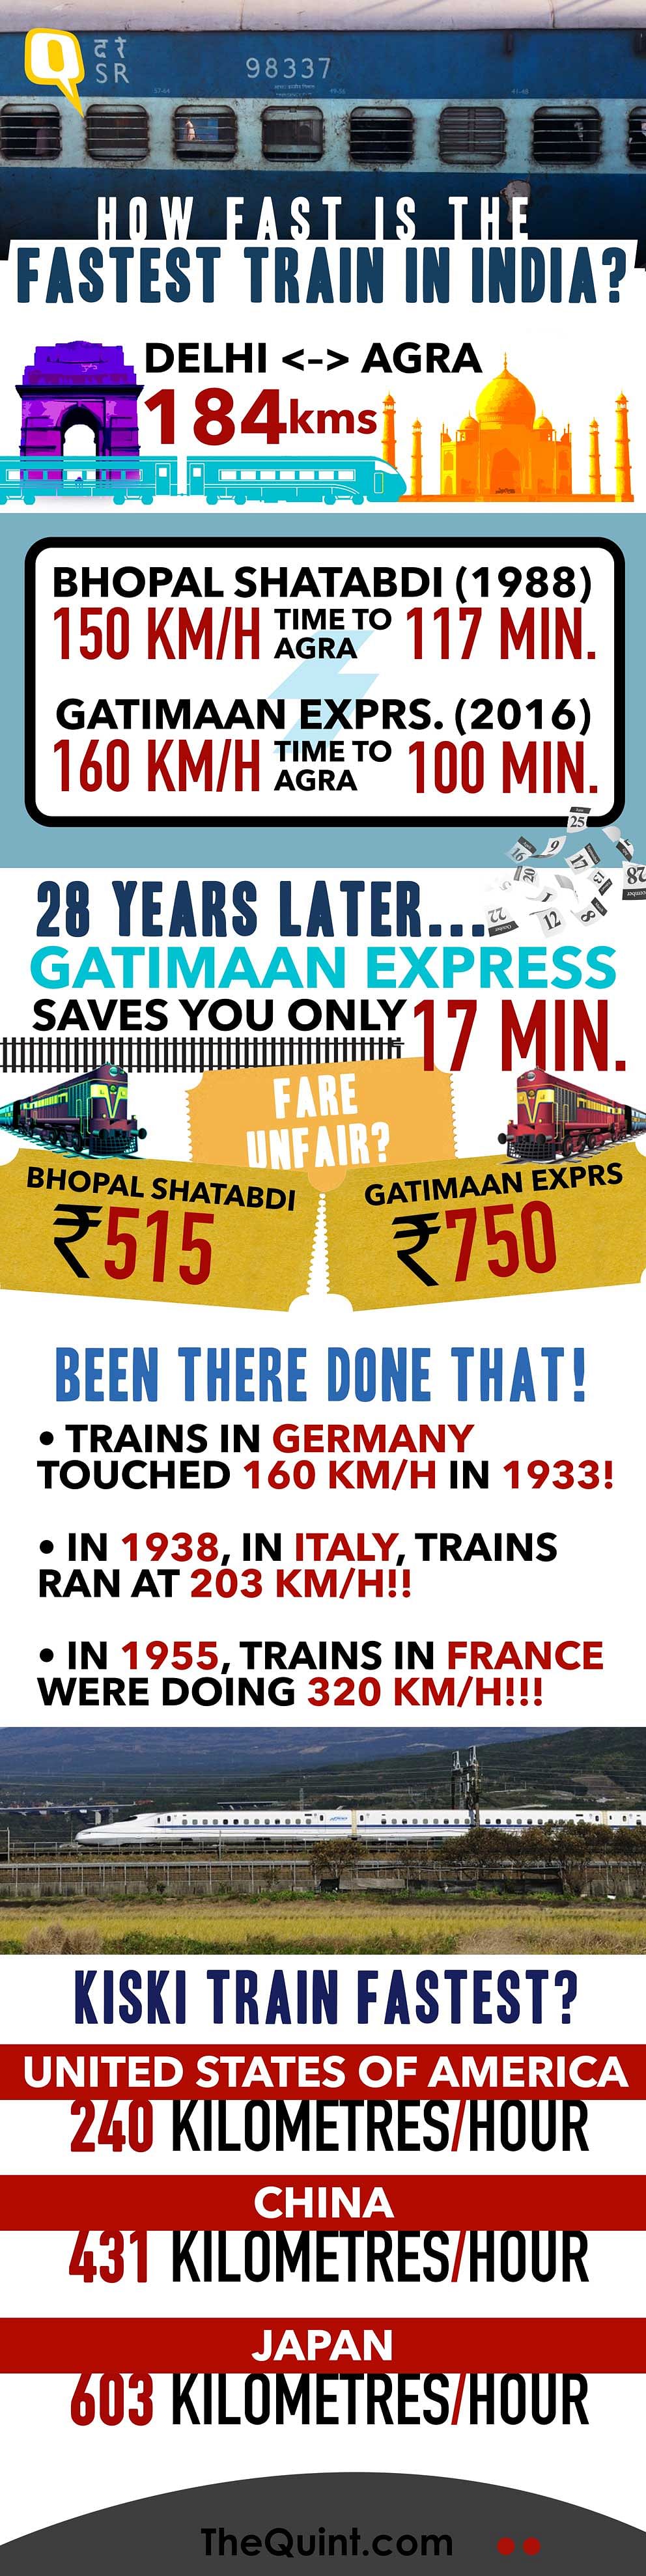 The Gatimaan Express is claimed to be the fastest train in India. But how fast it exactly? 